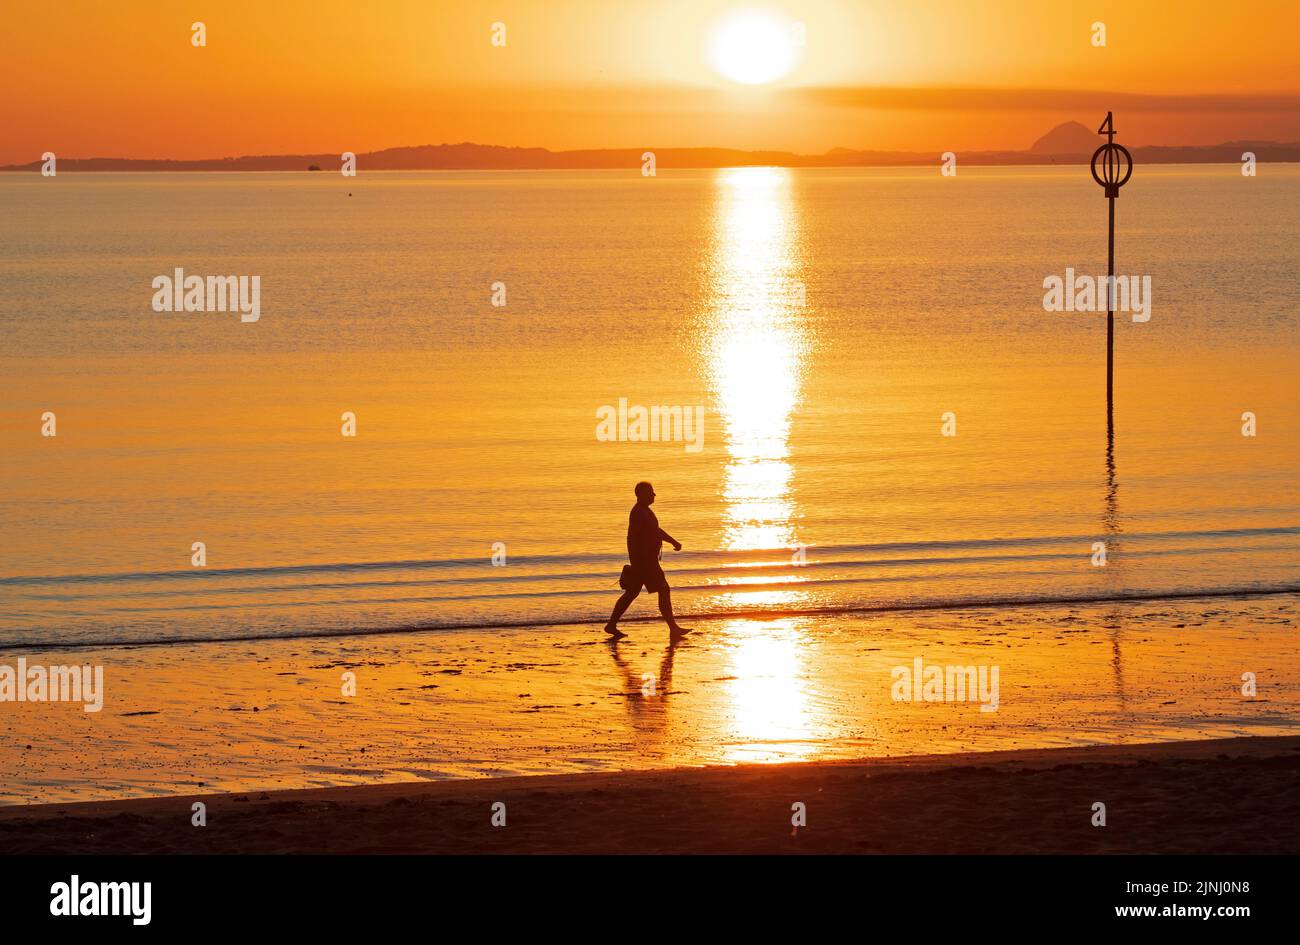 Portobello, Edinburgh, Scotland, UK. 12th August 2022. Stunning sunrise to end a very hot week of above average temperatures for Scotland, temperature this morning at dawn 13 degrees centigrade for those out for exercise at the Firth of Forth seaside with haar expected later on the east coast.. Pictured: A man walks along the shore at dawn. Credit: Arch White/alamy live news. Stock Photo